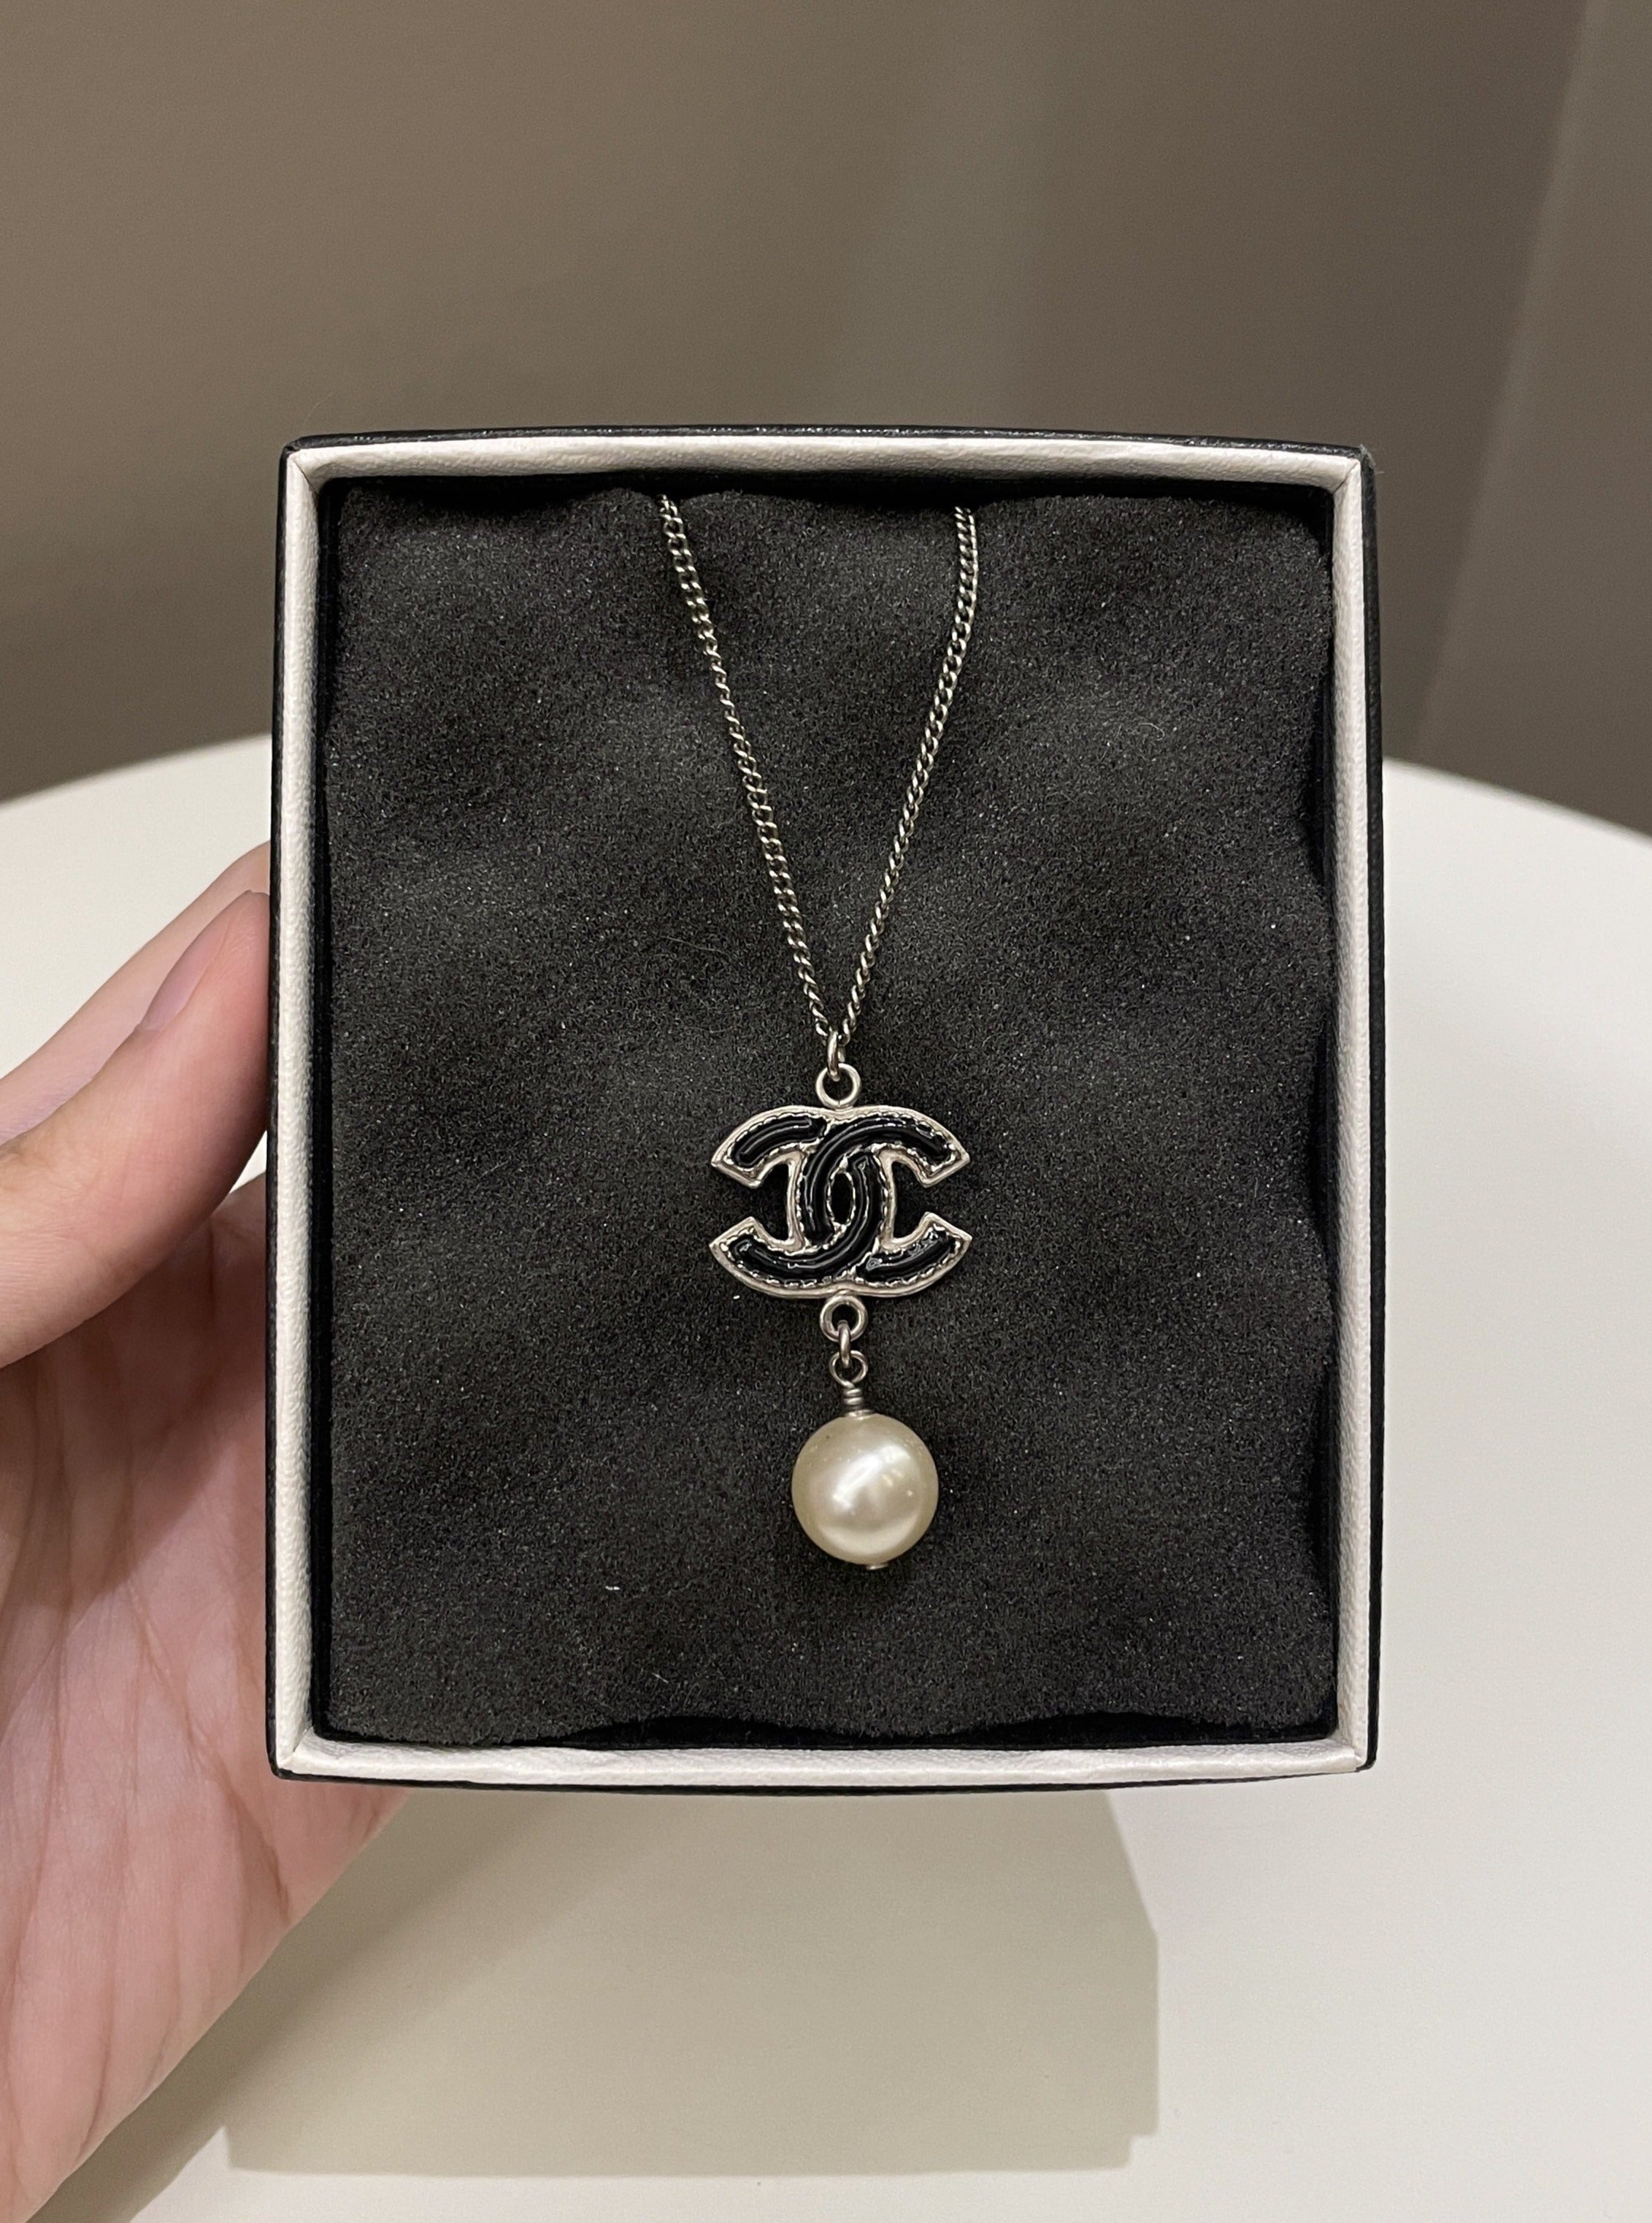 Chanel 14A Cc Pearl Drop Necklace Black / Ivory glass pearl